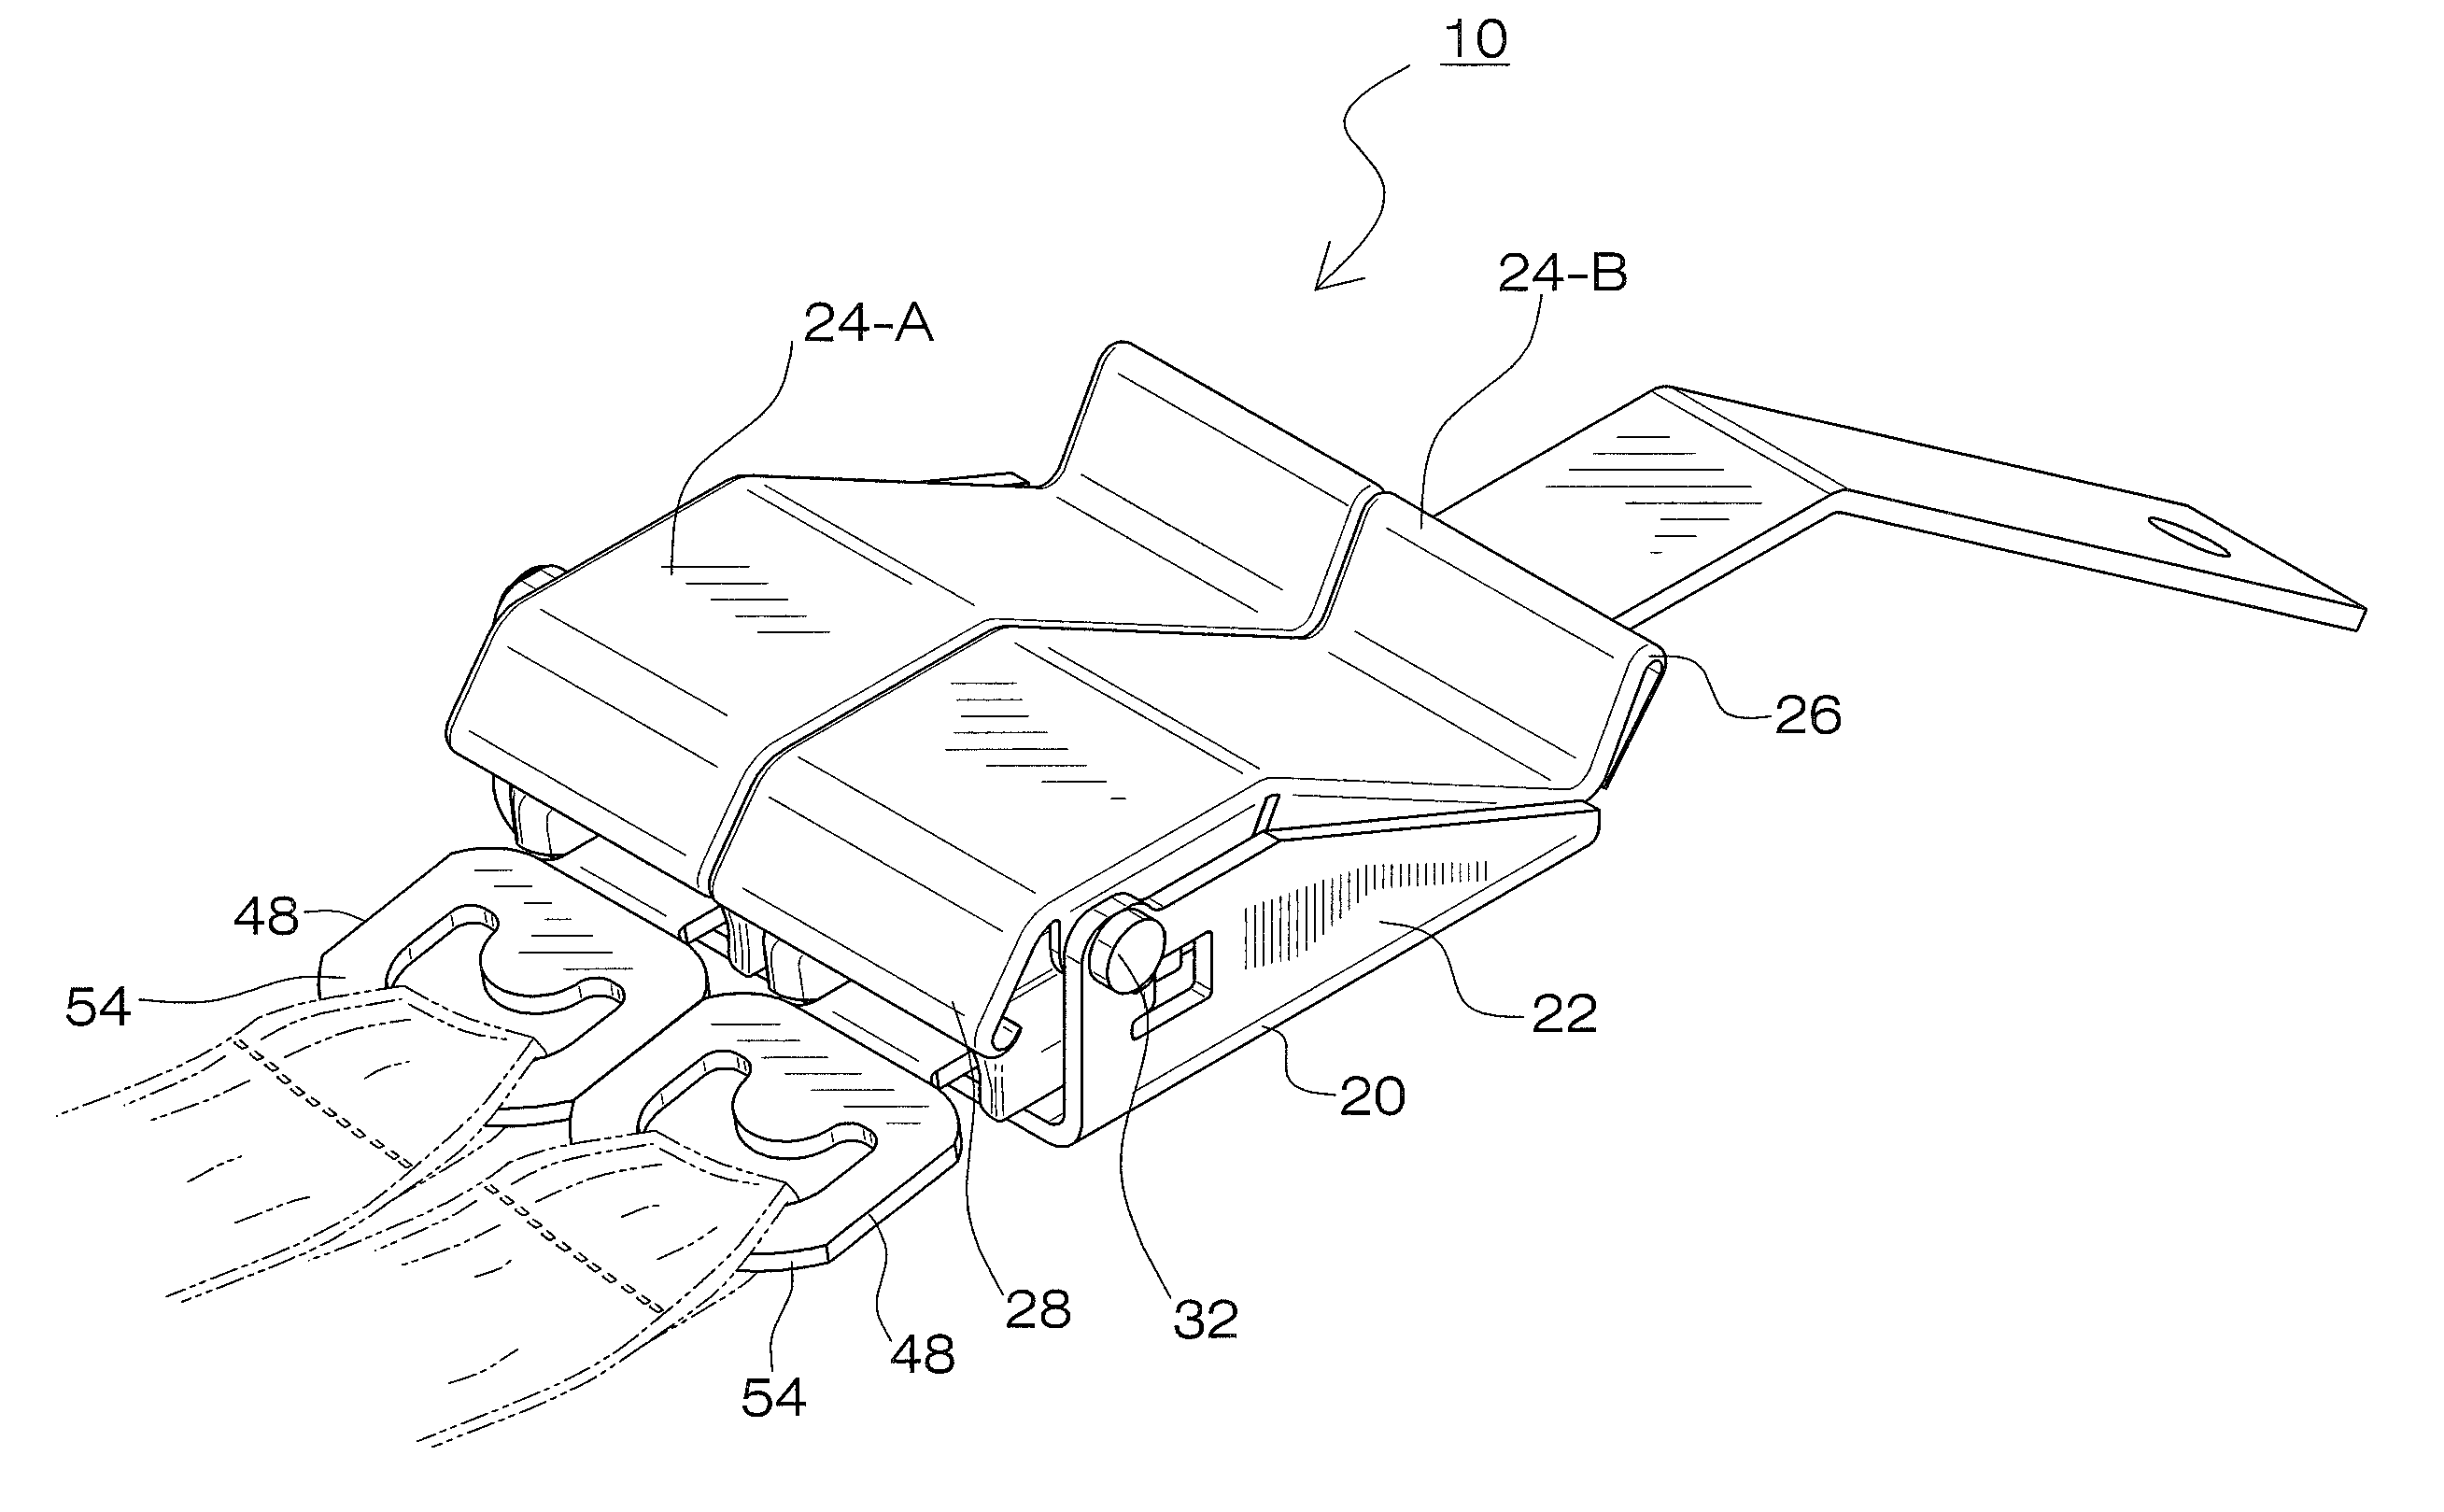 Housing for a dual release twin buckle assembly